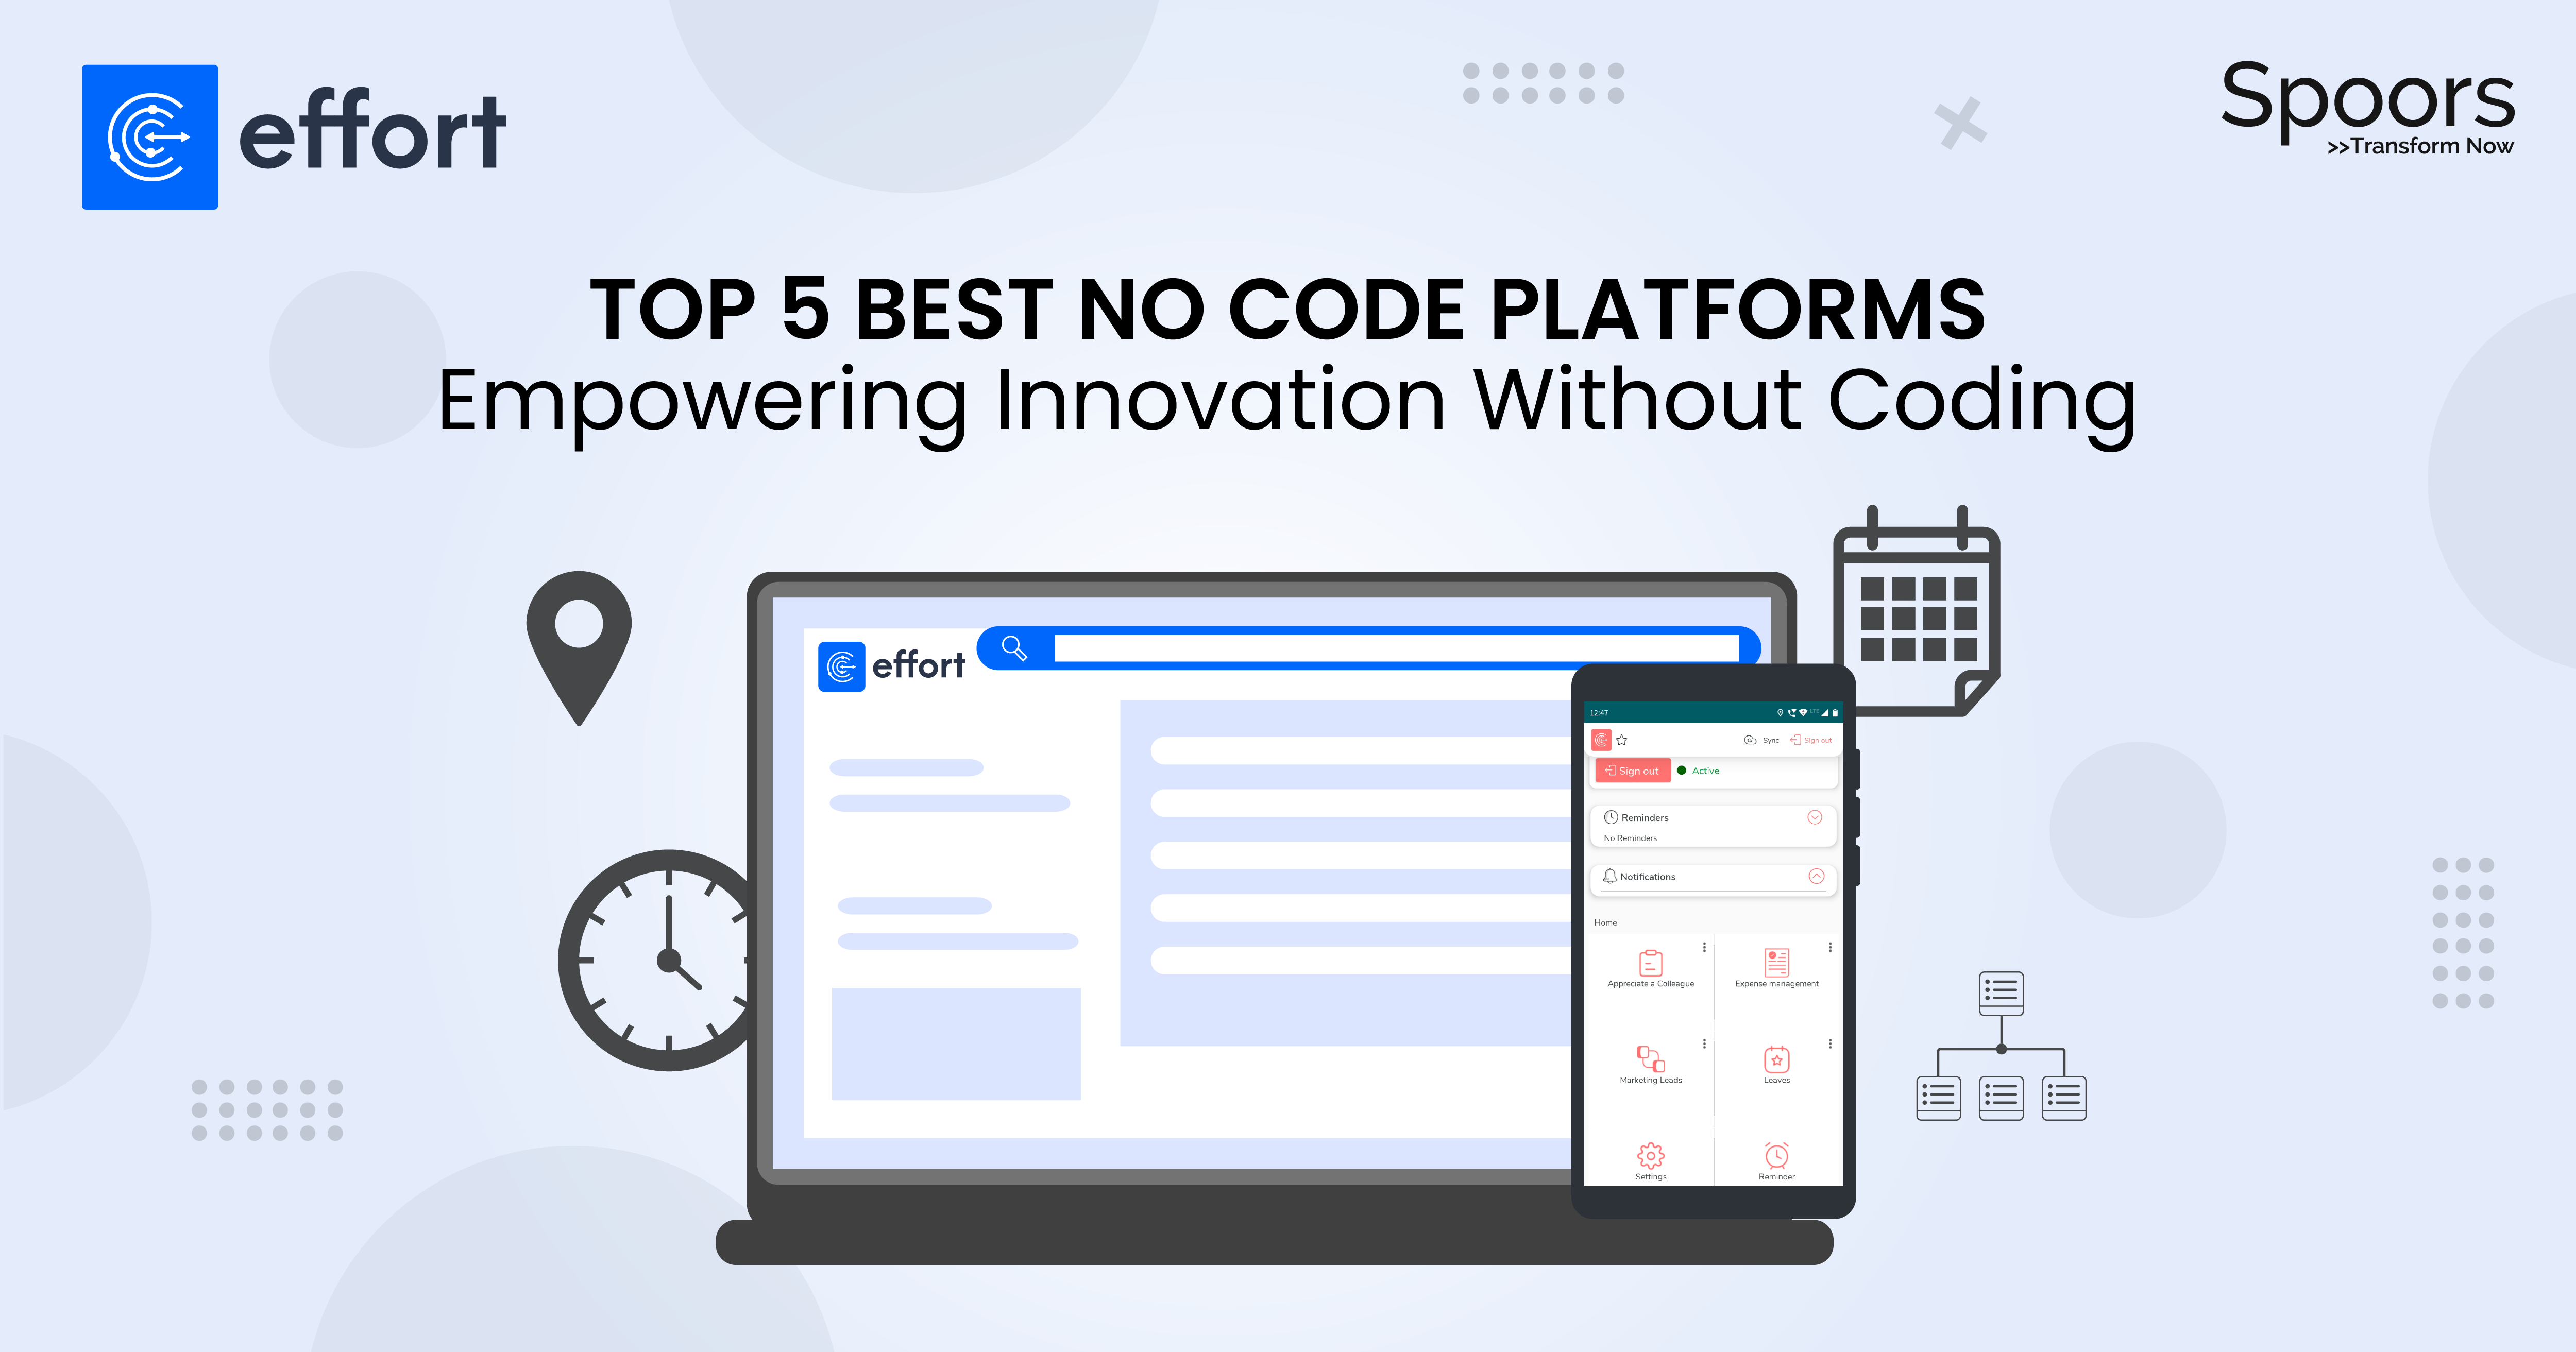 Top 5 Best No Code Platforms: Empowering Innovation Without Coding